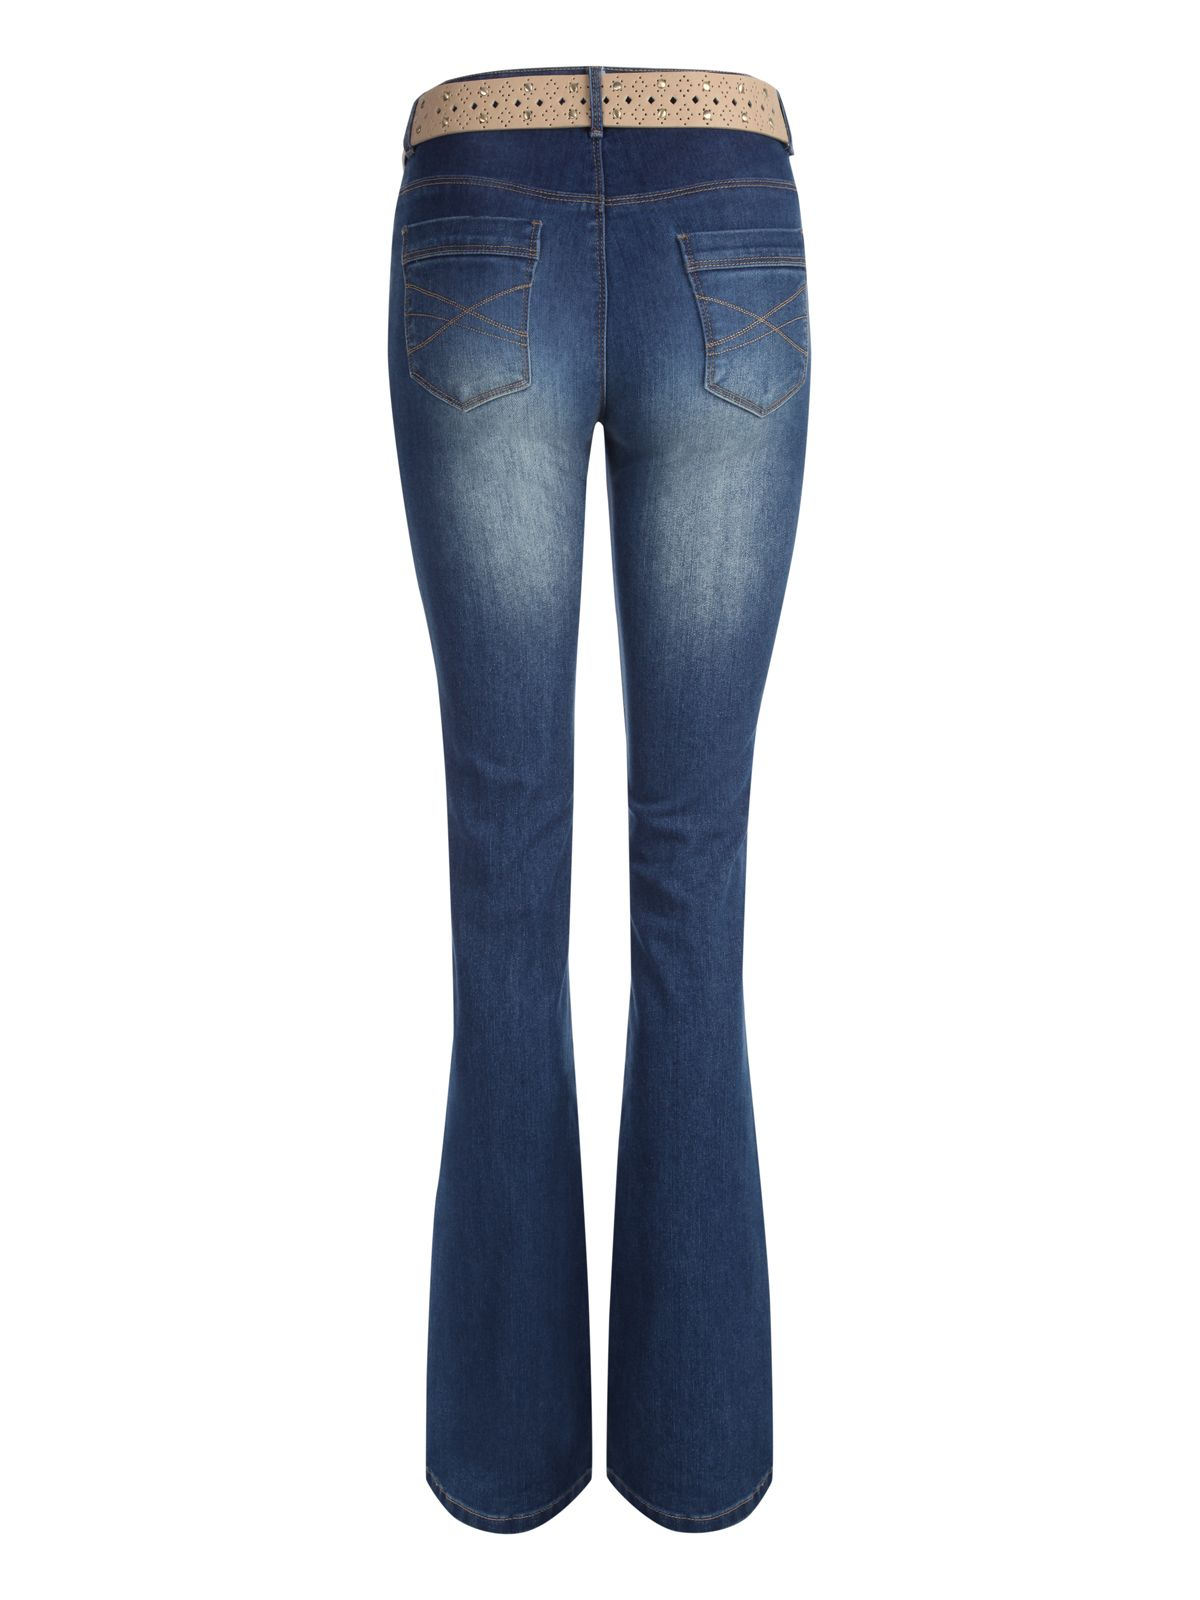 Jane norman Bootleg Fit Jeans with Belt in Blue (Denim) | Lyst